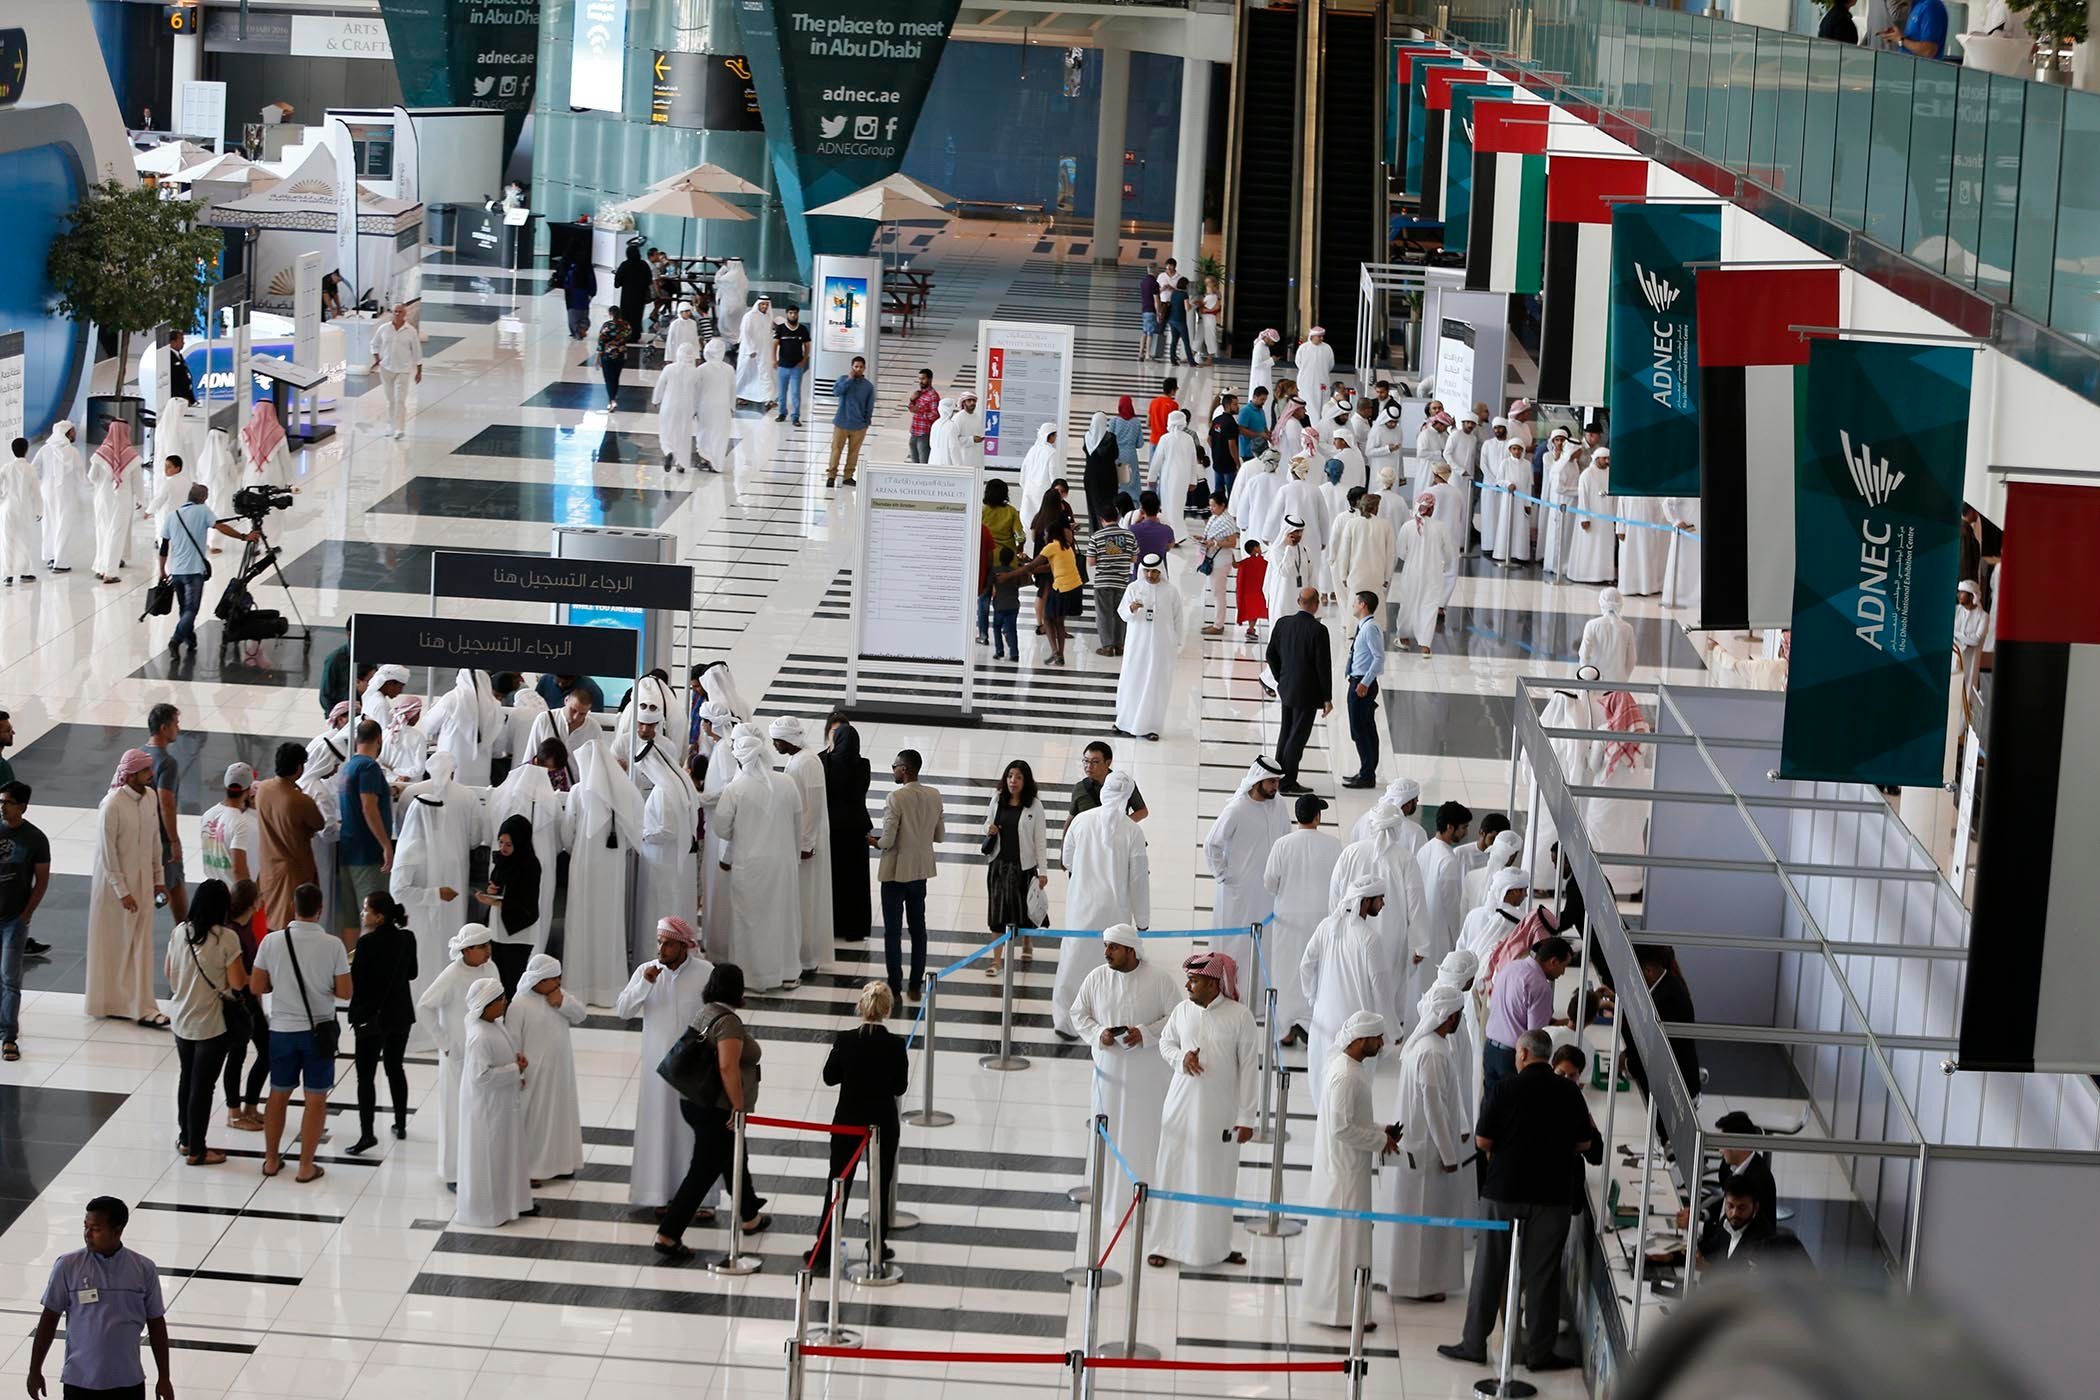 Bird's eye view of attendees at a conference centre hosting a business event in Abu Dhabi